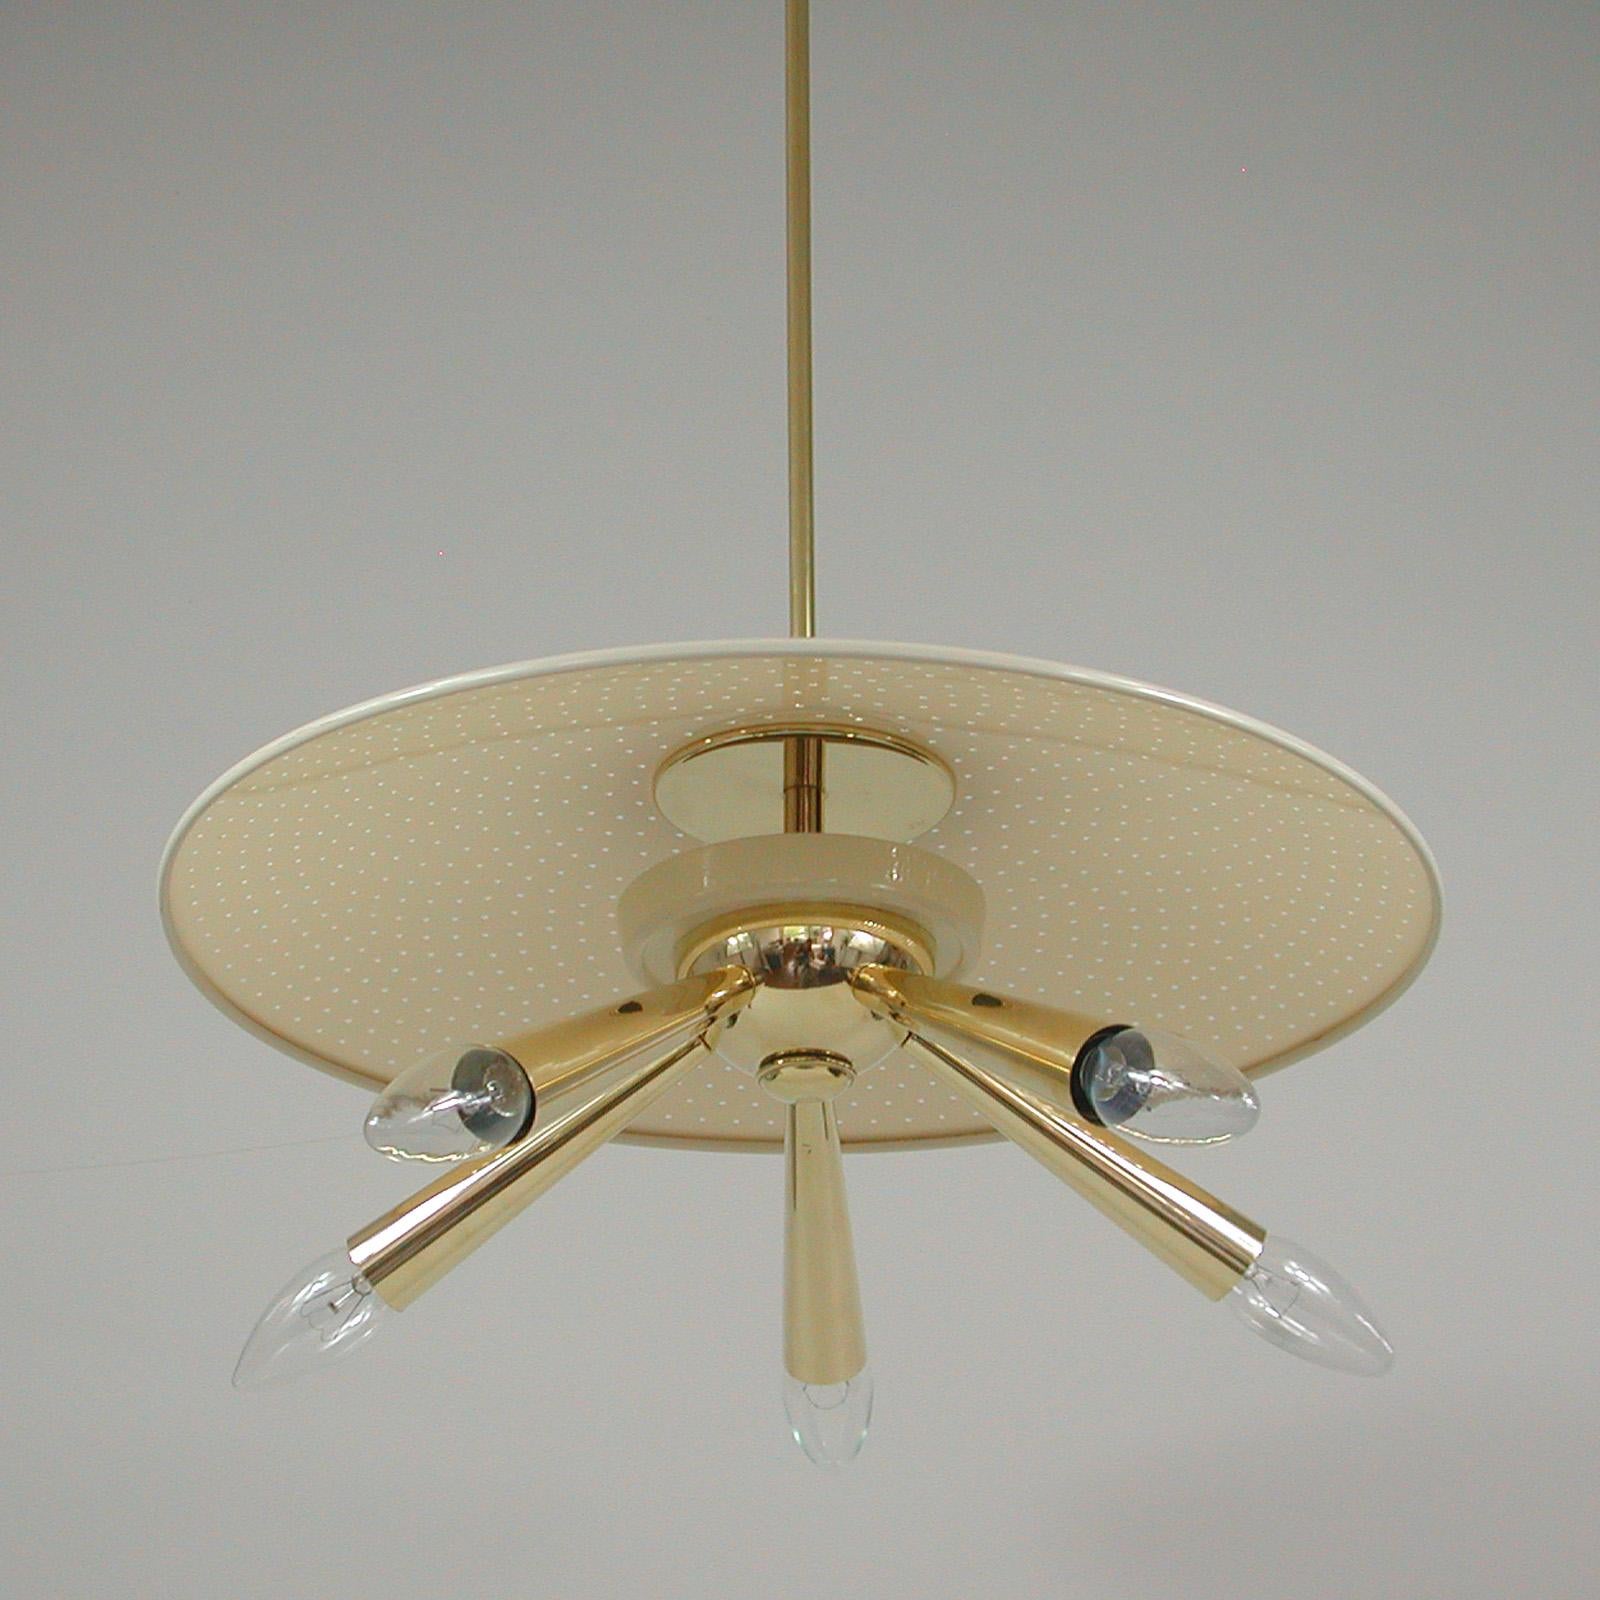 Italian Midcentury Brass Dome 5 Light Pendant, Italy Early 1950s For Sale